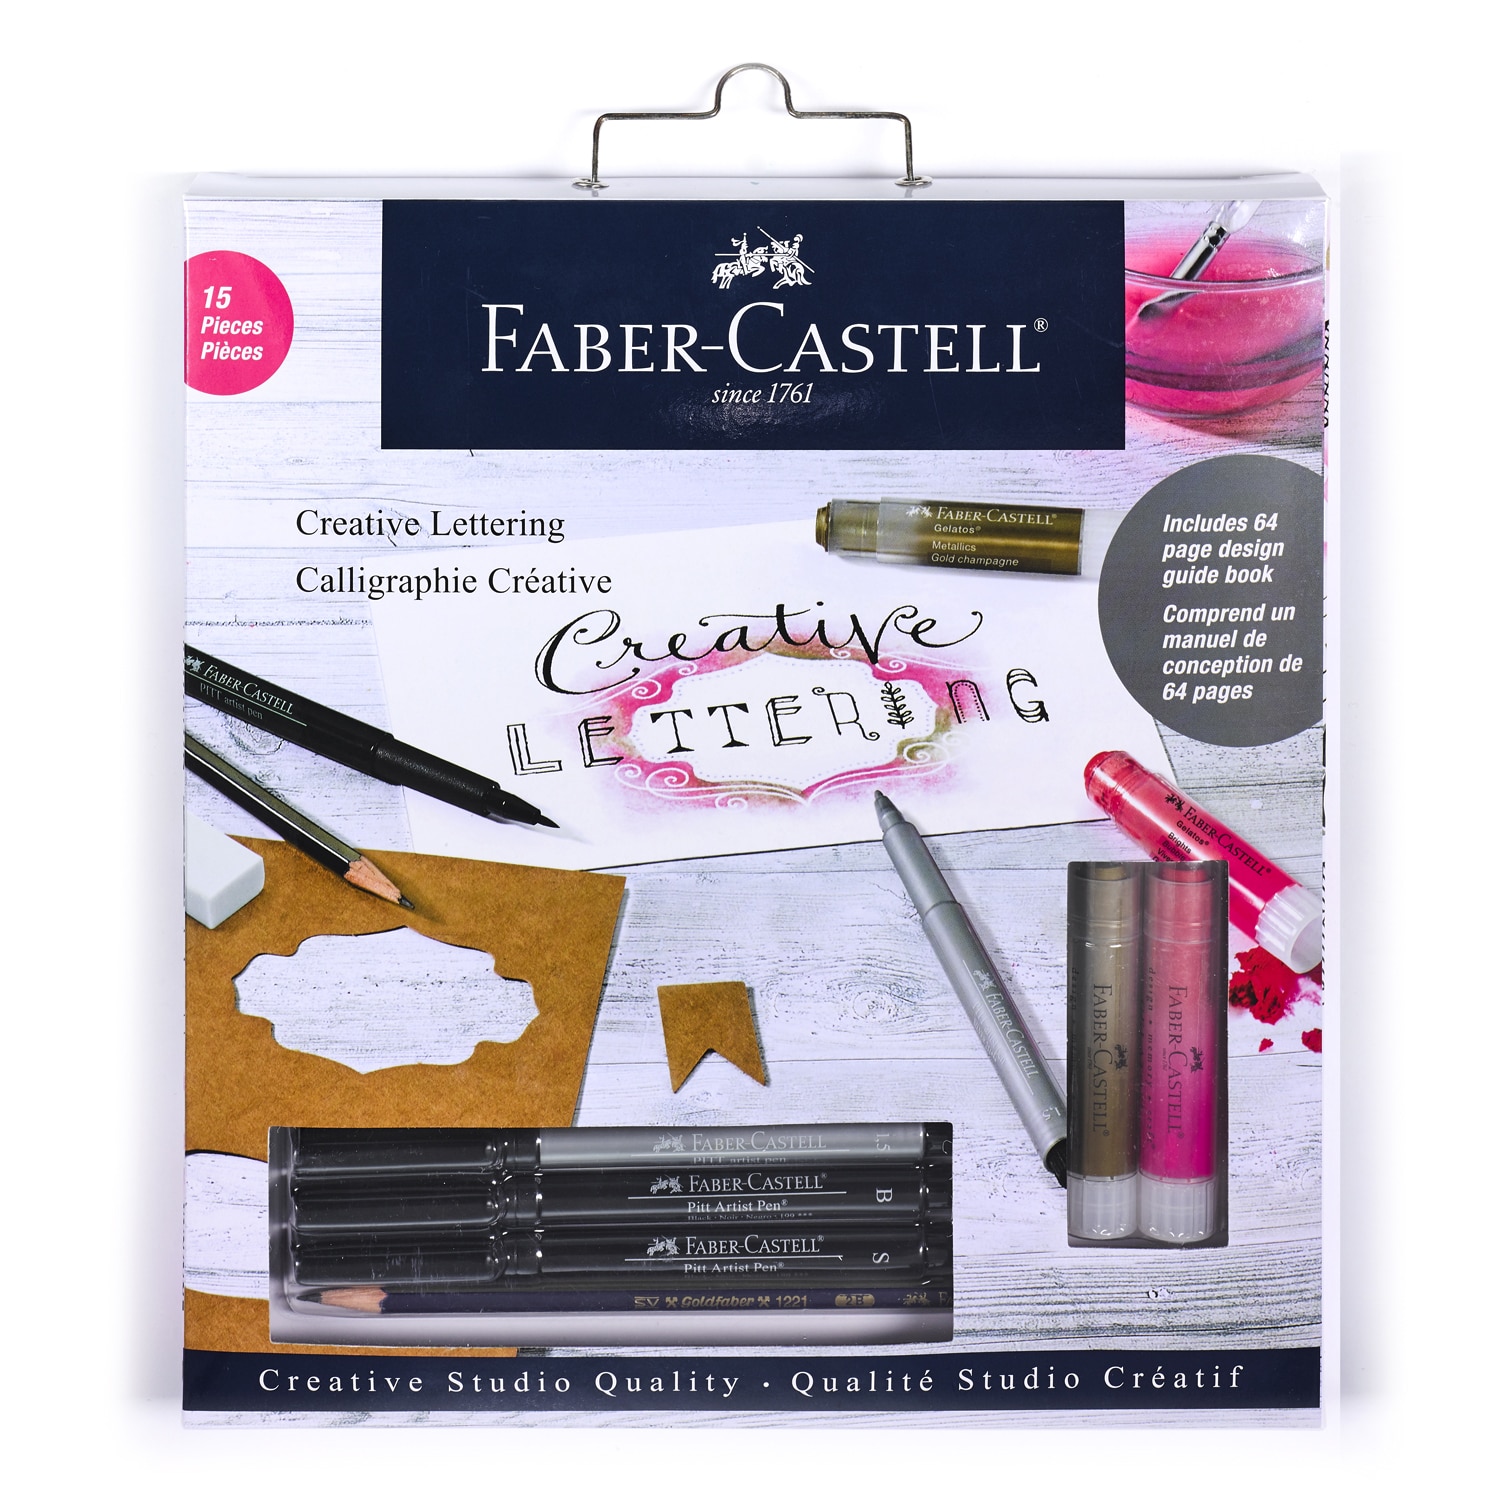 Stratford on Avon Celebridad Saco Faber-Castell Creative Lettering Kit in the Craft Supplies department at  Lowes.com